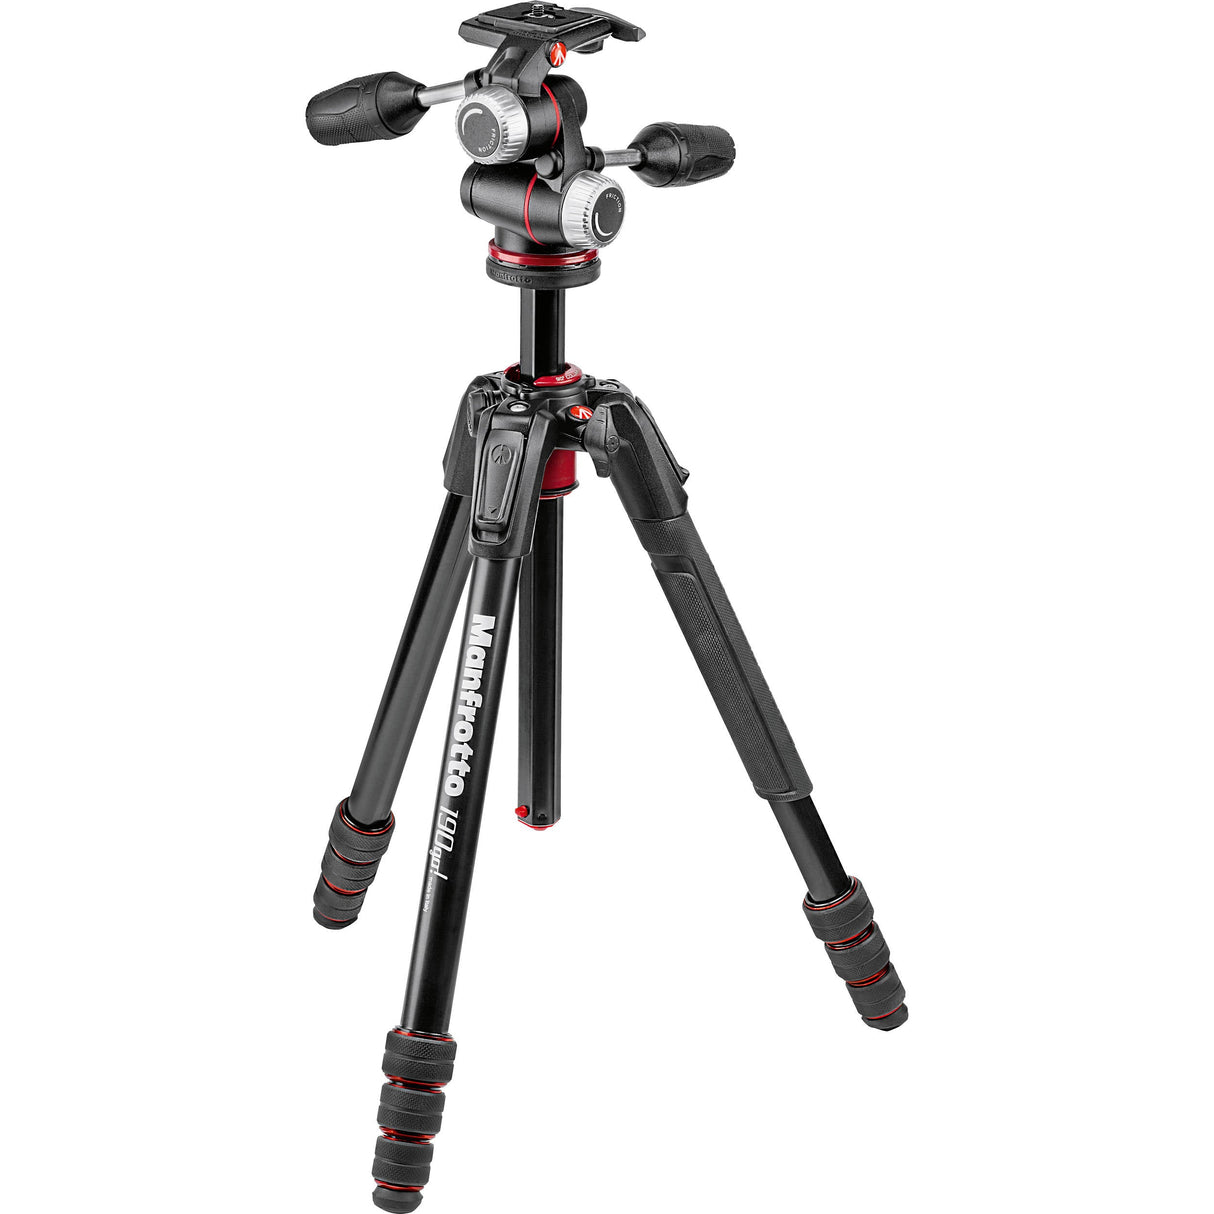 Manfrotto 190go! Aluminum M-Series Tripod with MHXPRO-3W 3-Way Pan/Tilt Head